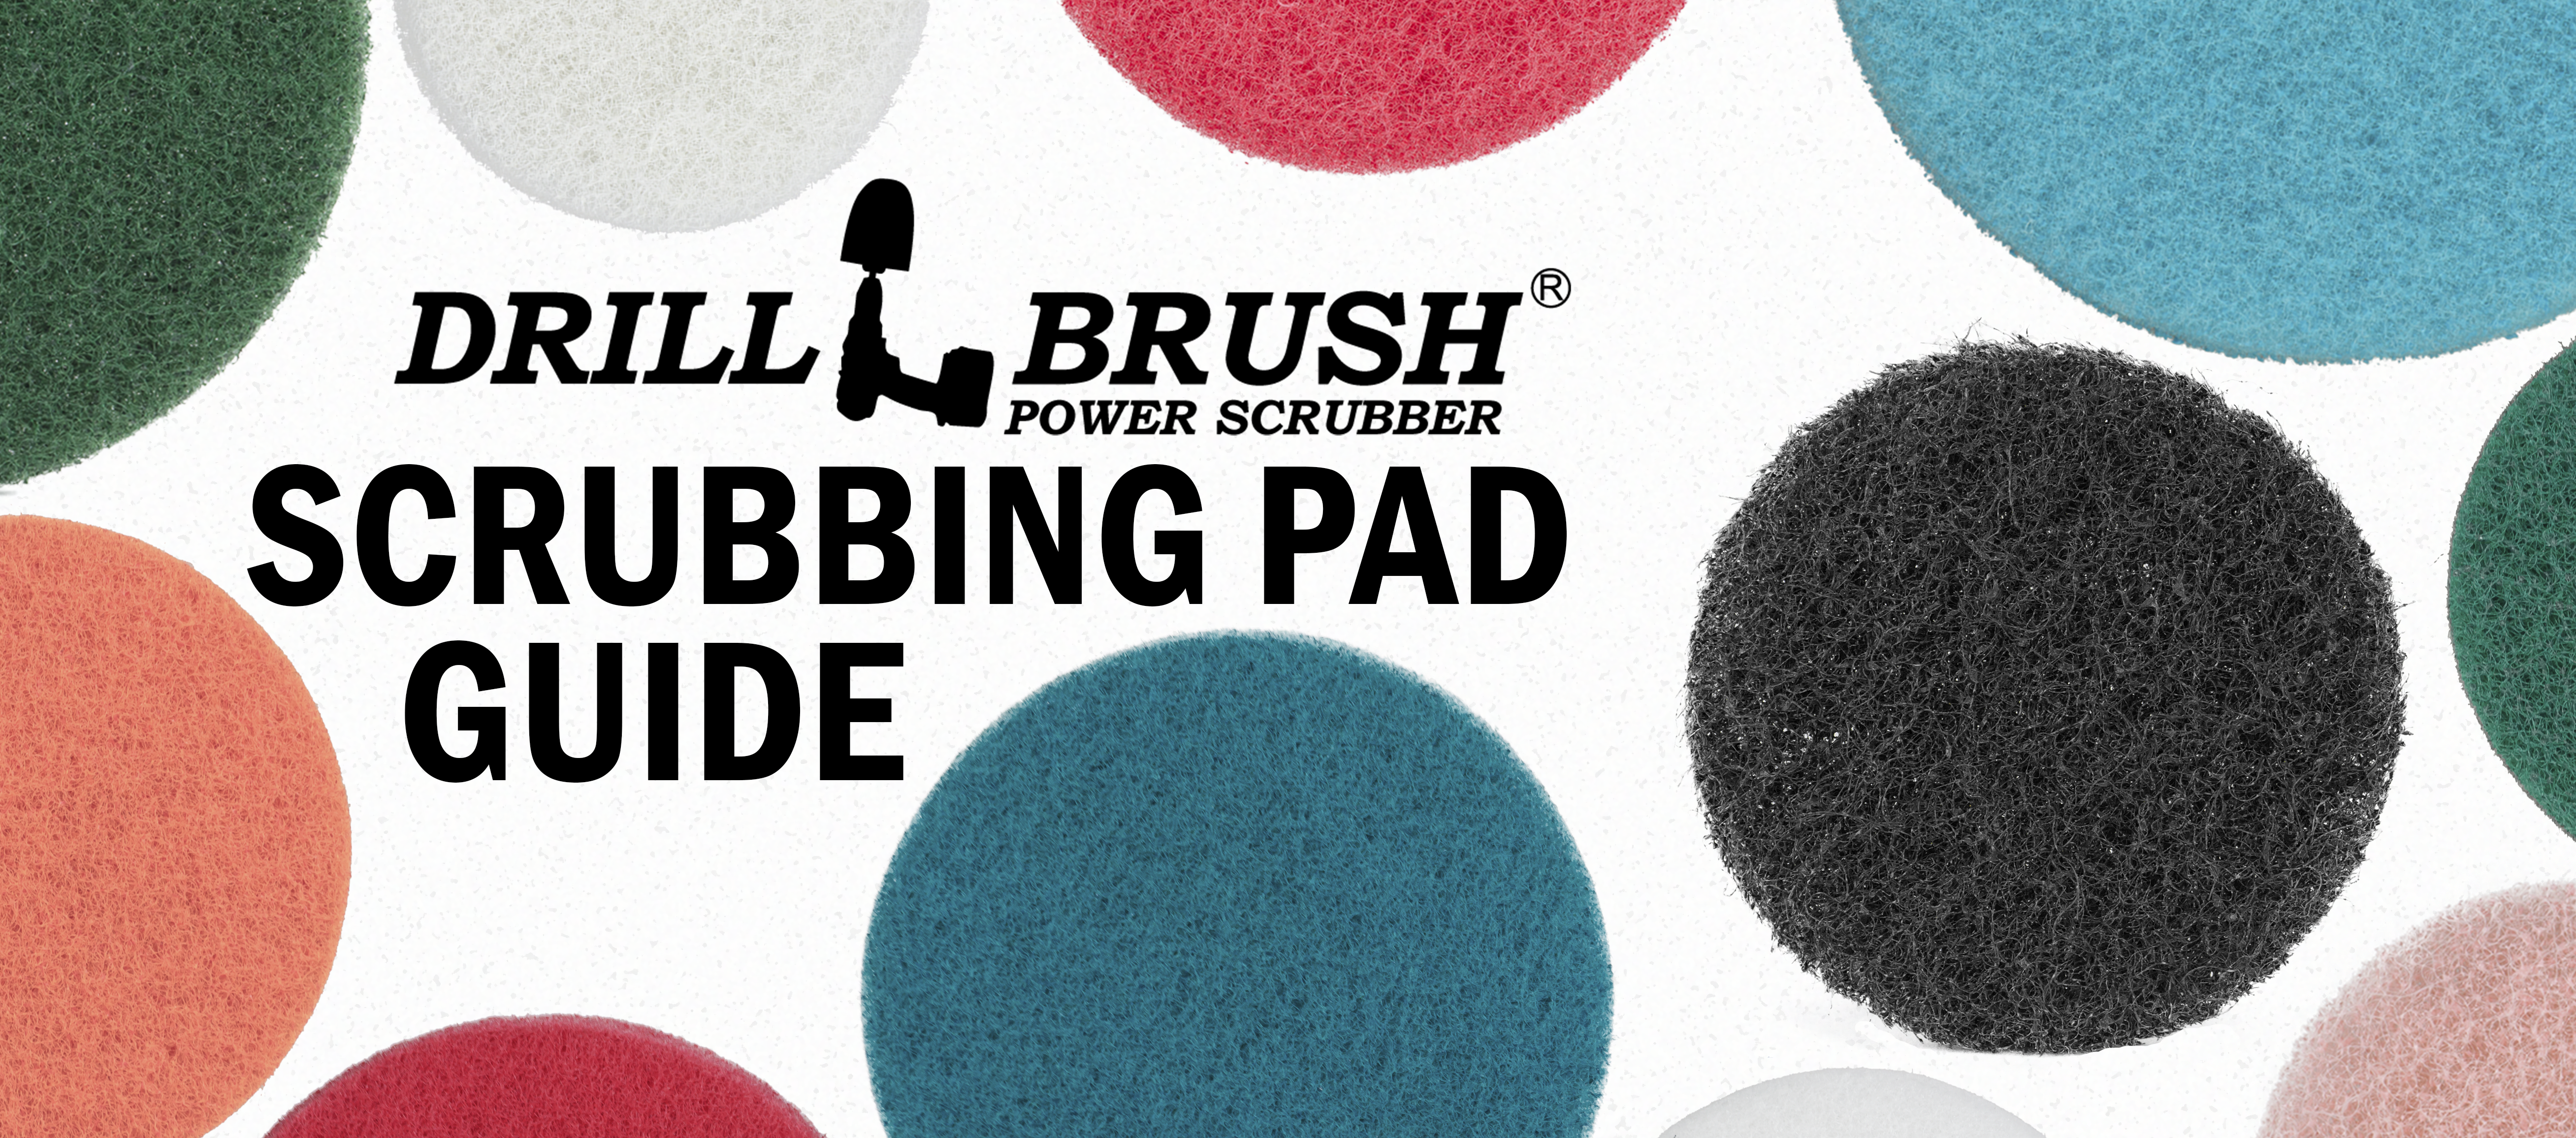 Pot Scrubbers And Scouring Pads Reviews - Which Products Work Best?